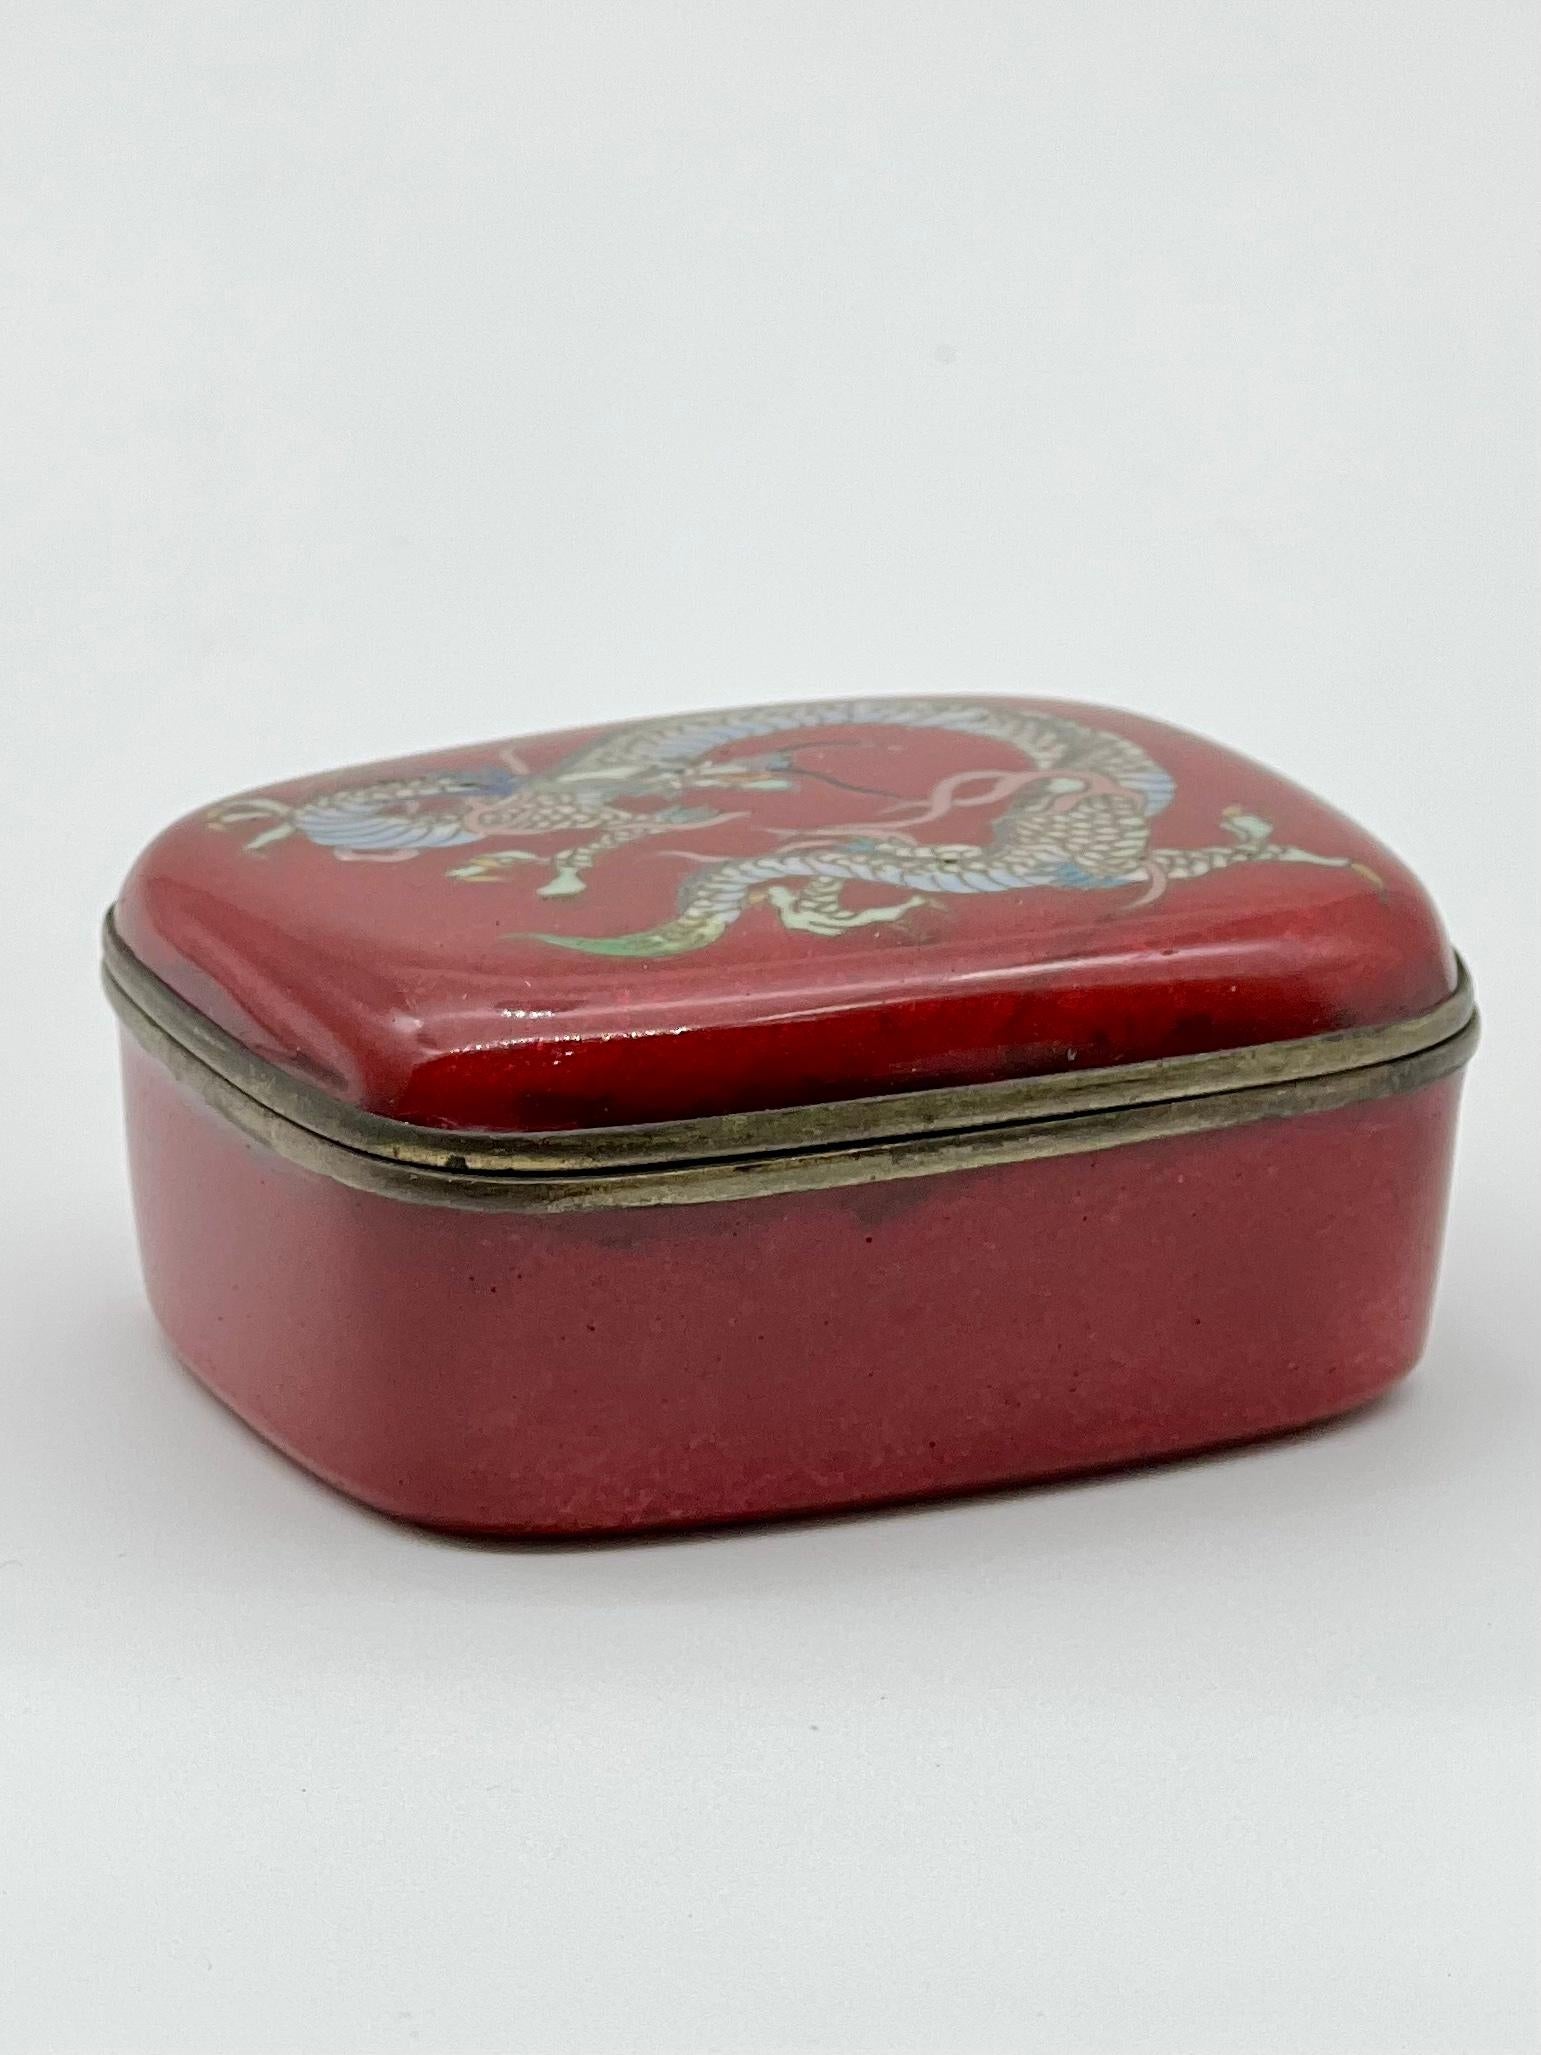 Exquisite Japanese Cloisonne Enamel Box and Cover. 19th C For Sale 10